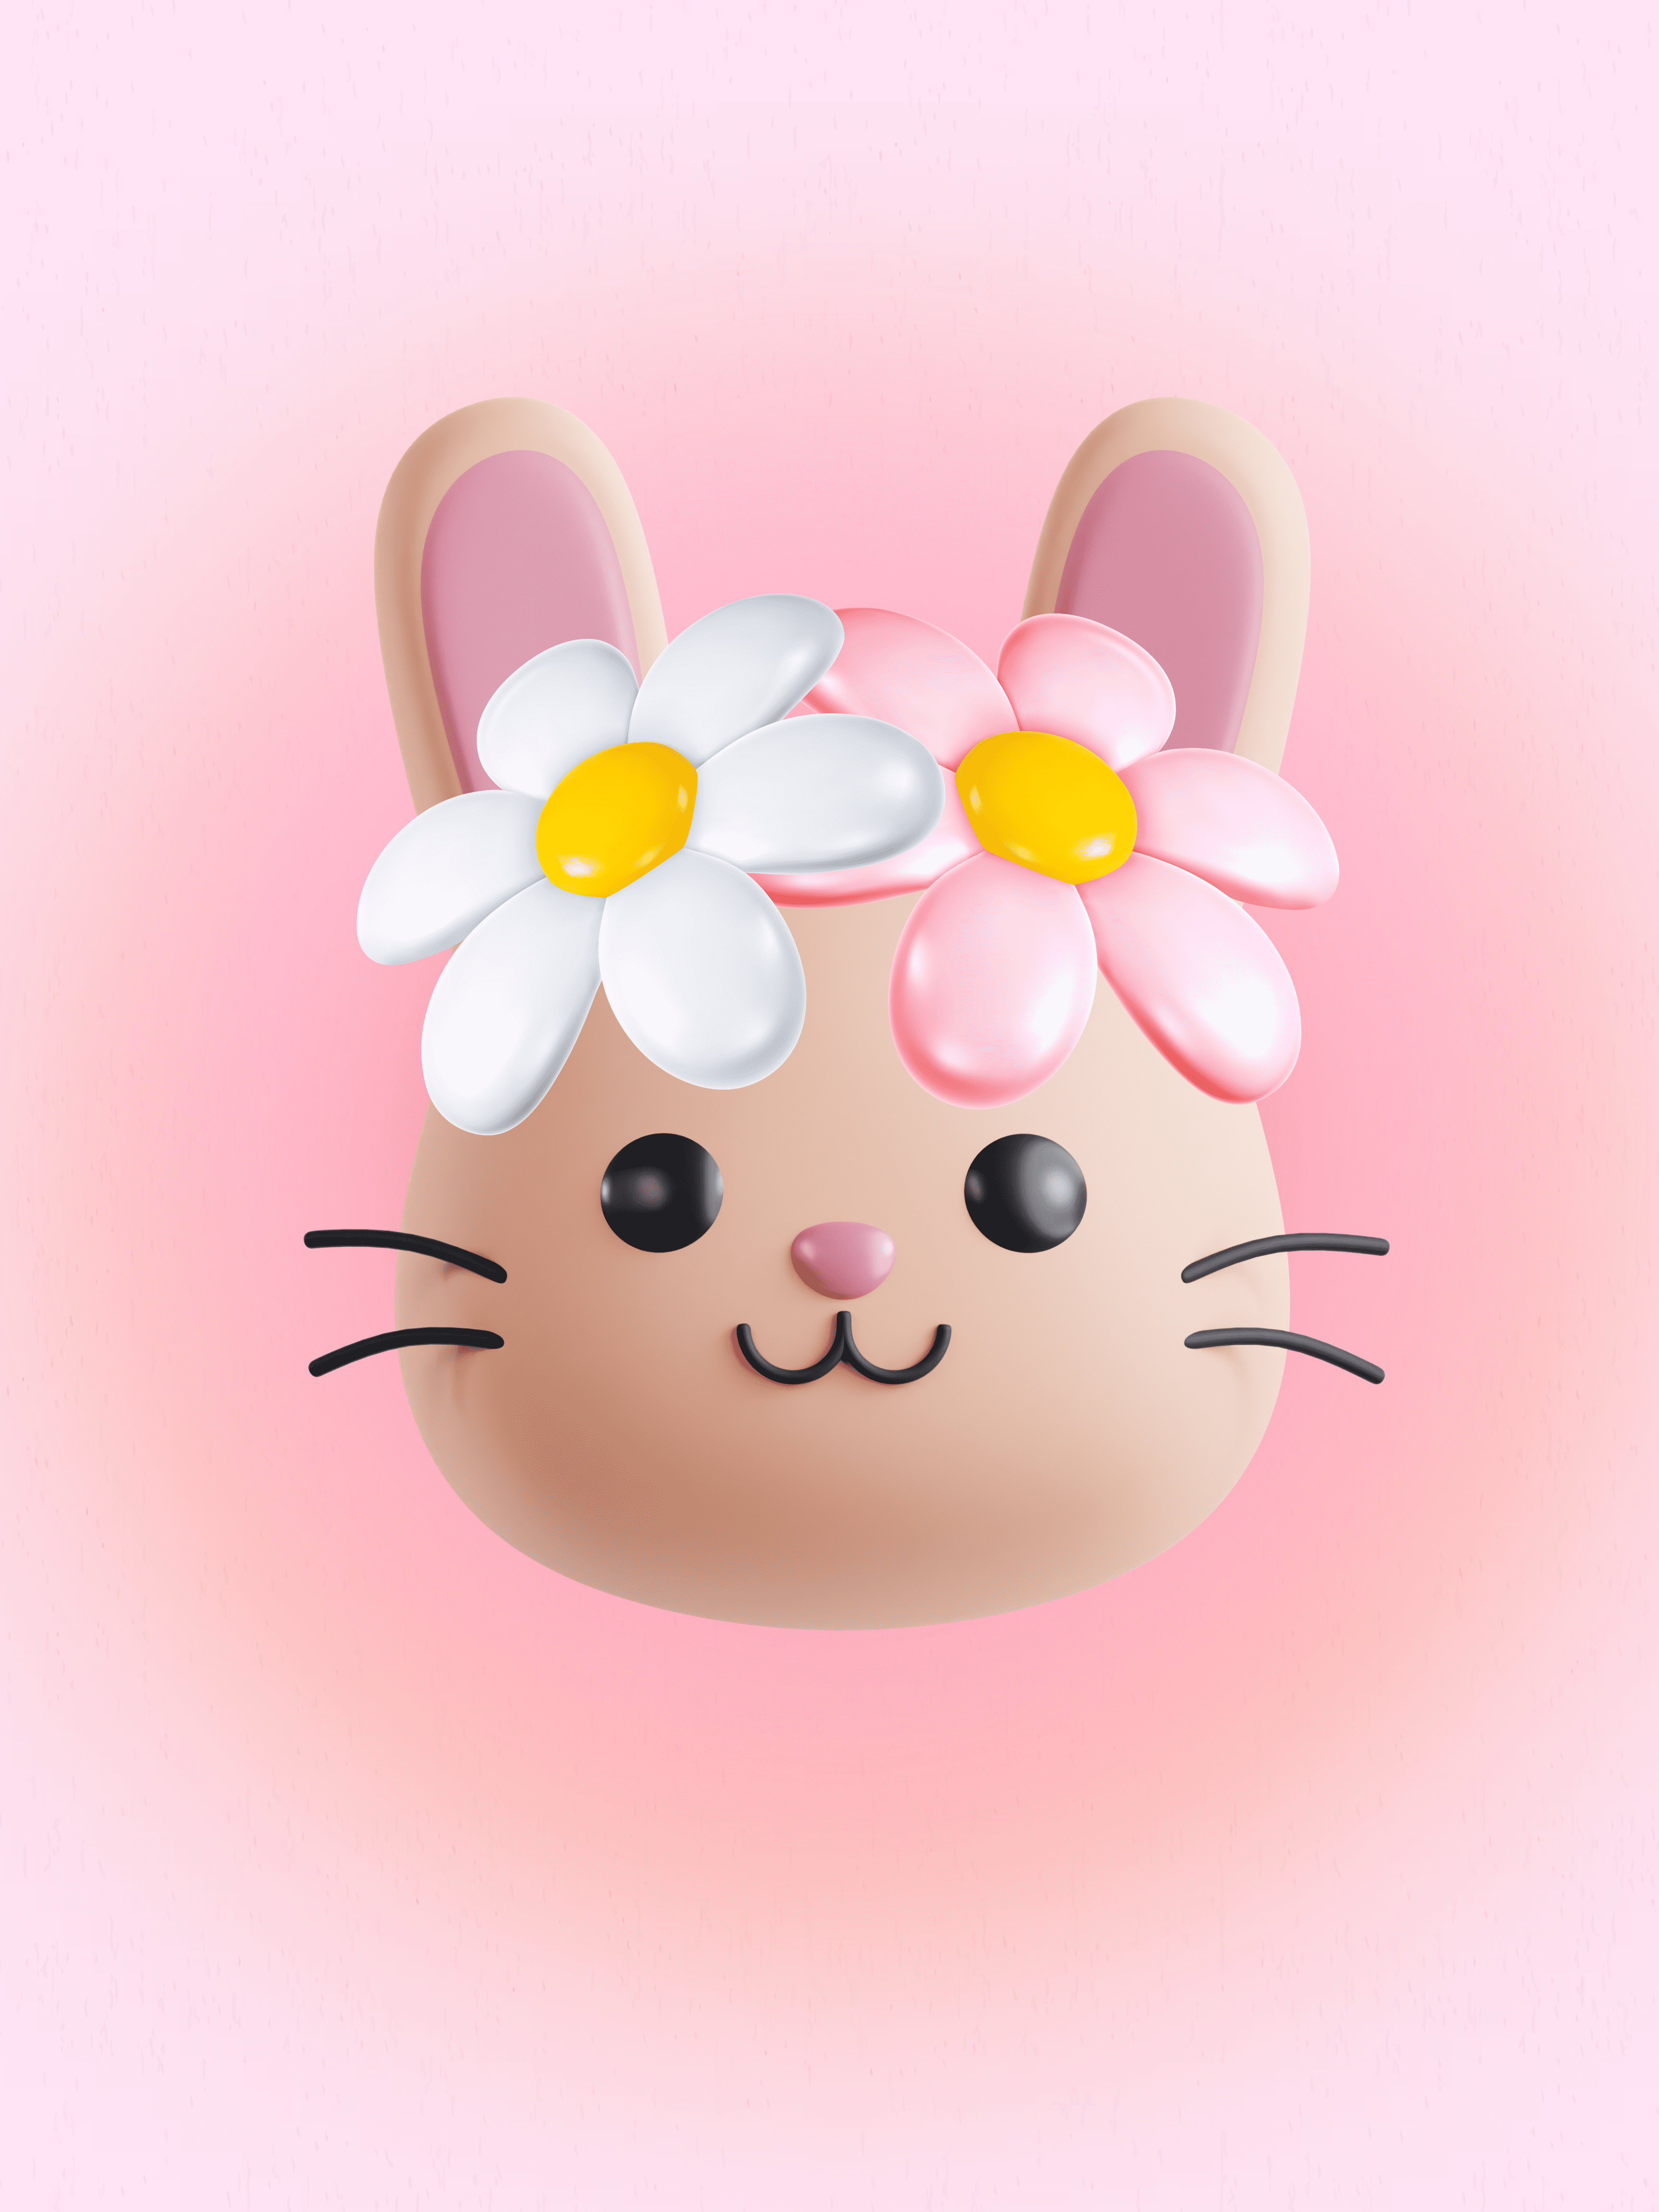 Flower bunny kawaii profile picture🐰